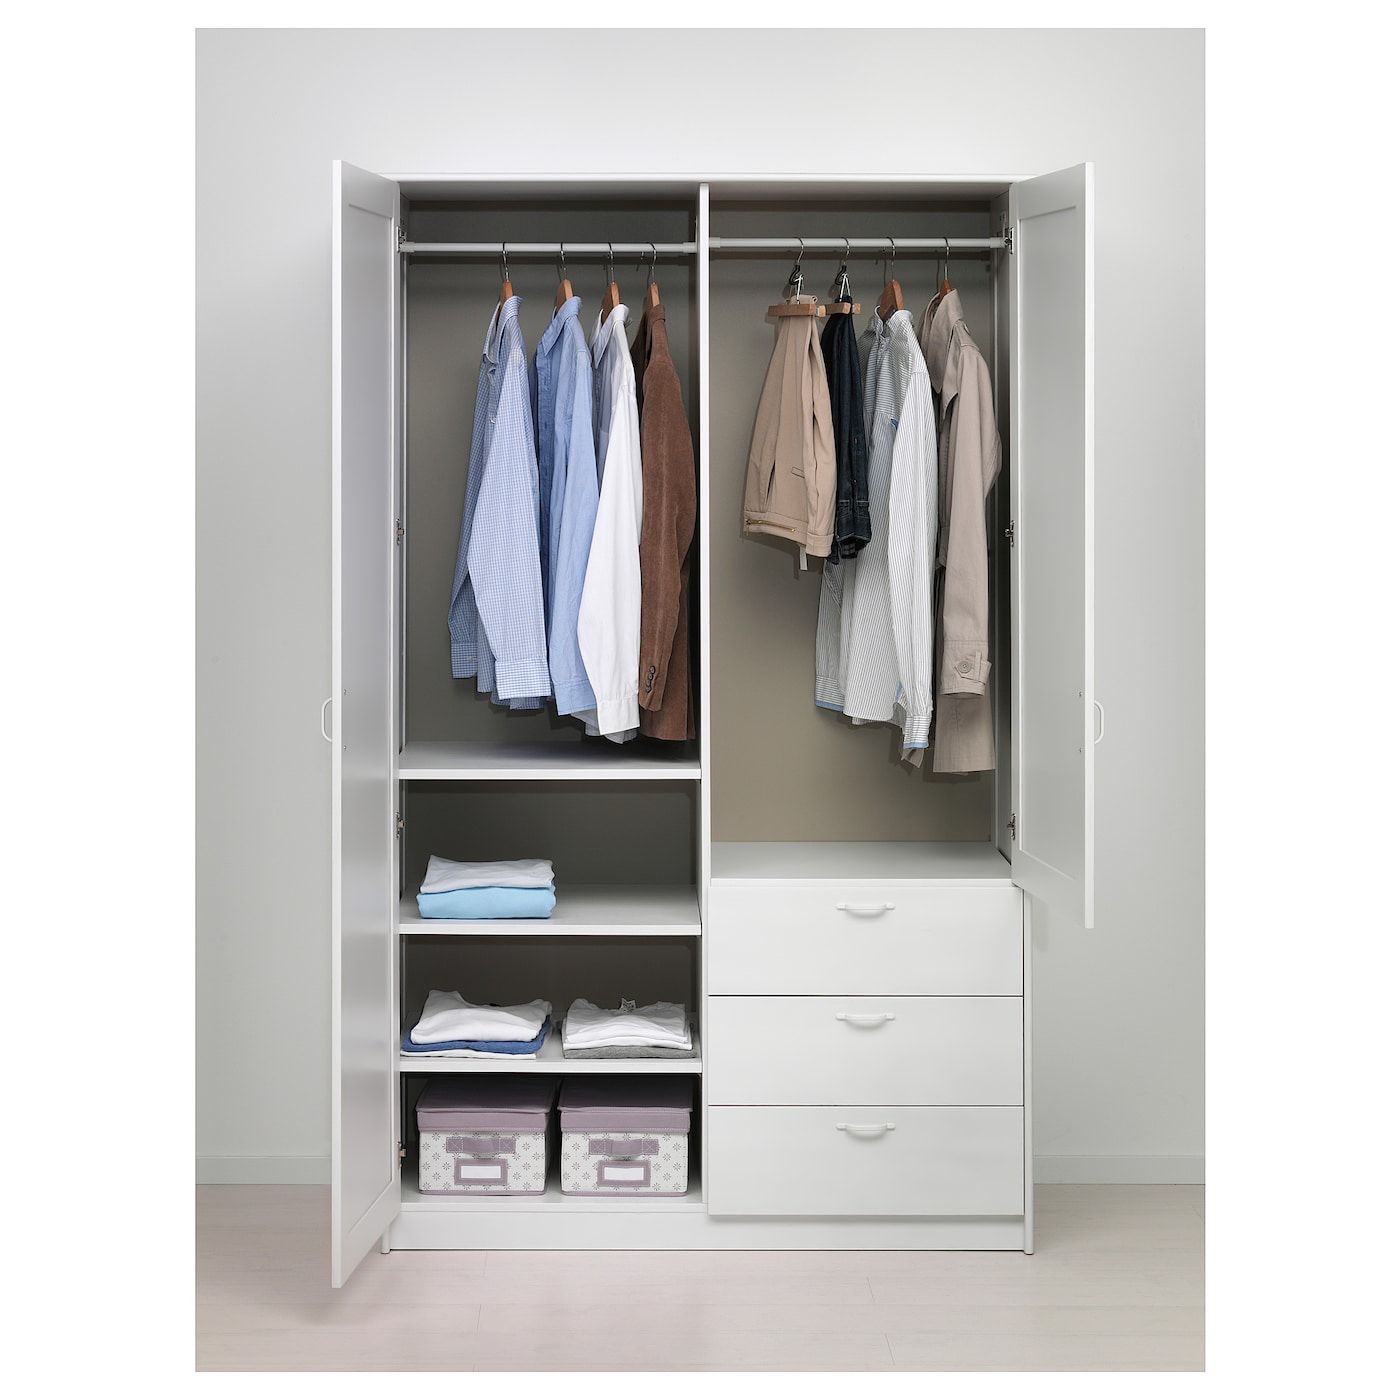 Musken Wardrobe With 2 Doors+3 Drawers, White, 124x60x201 Cm  (487/8x235/8x787/8") – Ikea Pertaining To Wardrobes Drawers And Shelves Ikea (View 9 of 15)